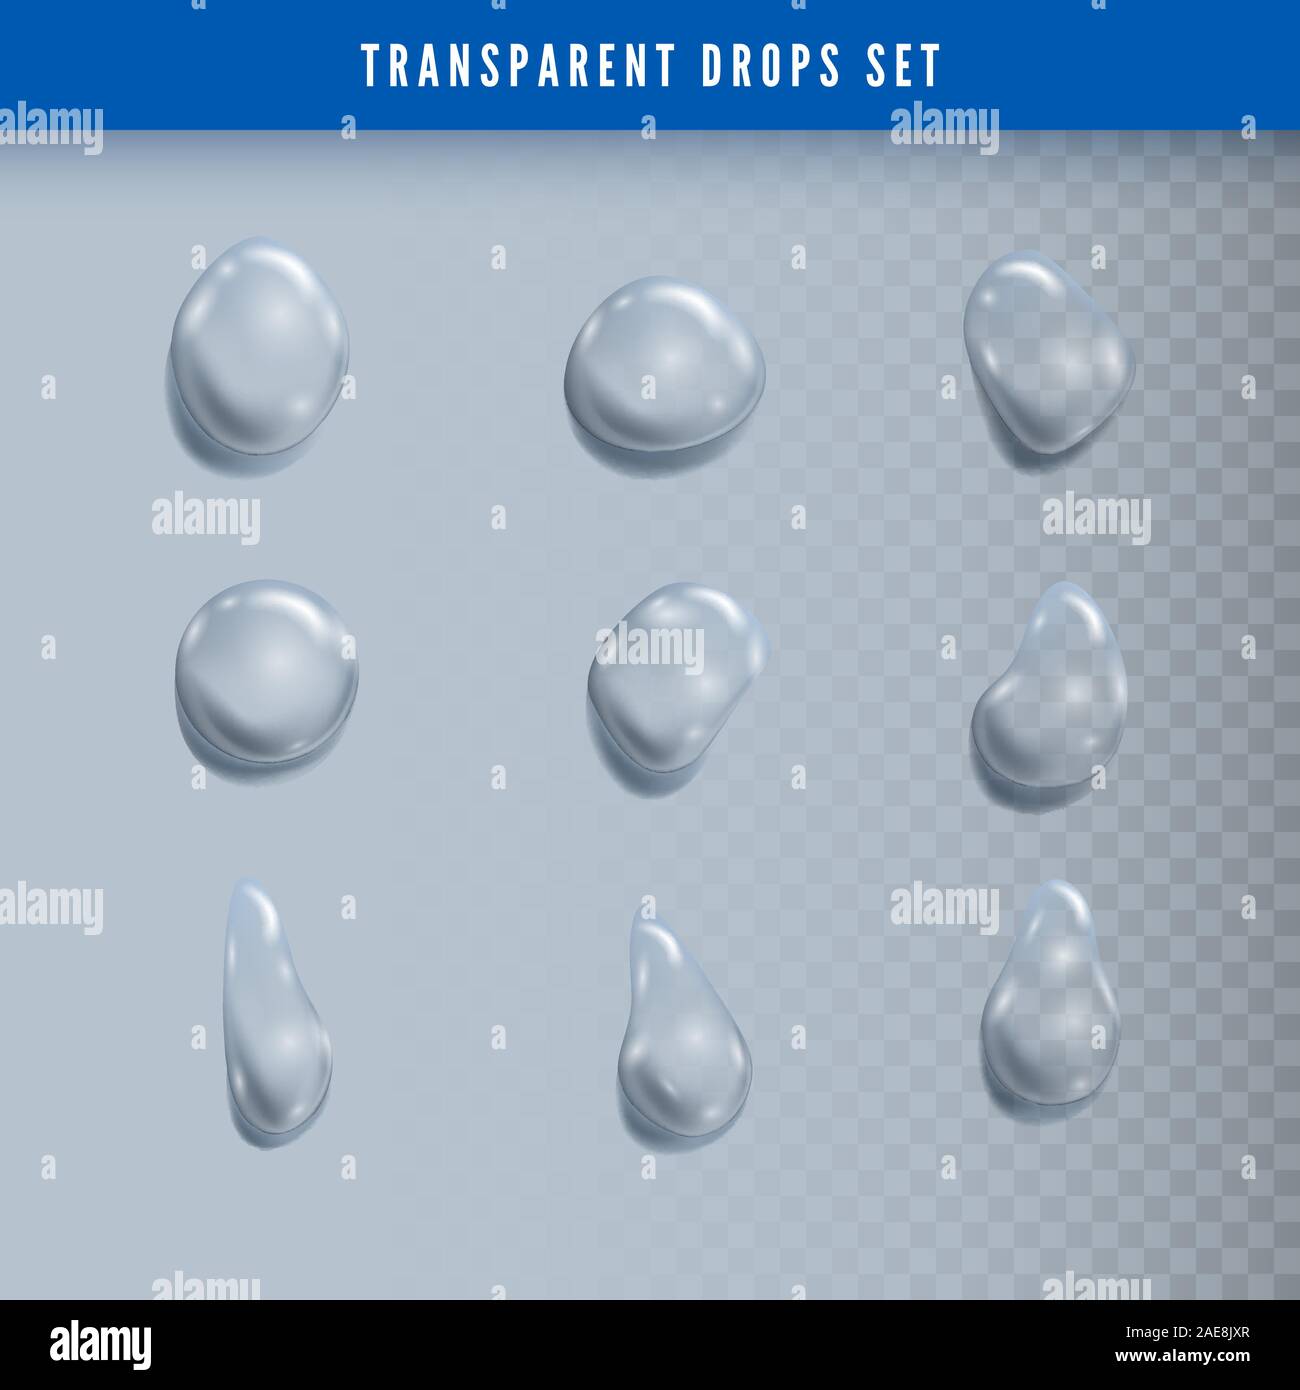 Set of Drops. Liquid clear droplet. Dew on glass surface. vector illustration on transparent background Stock Vector